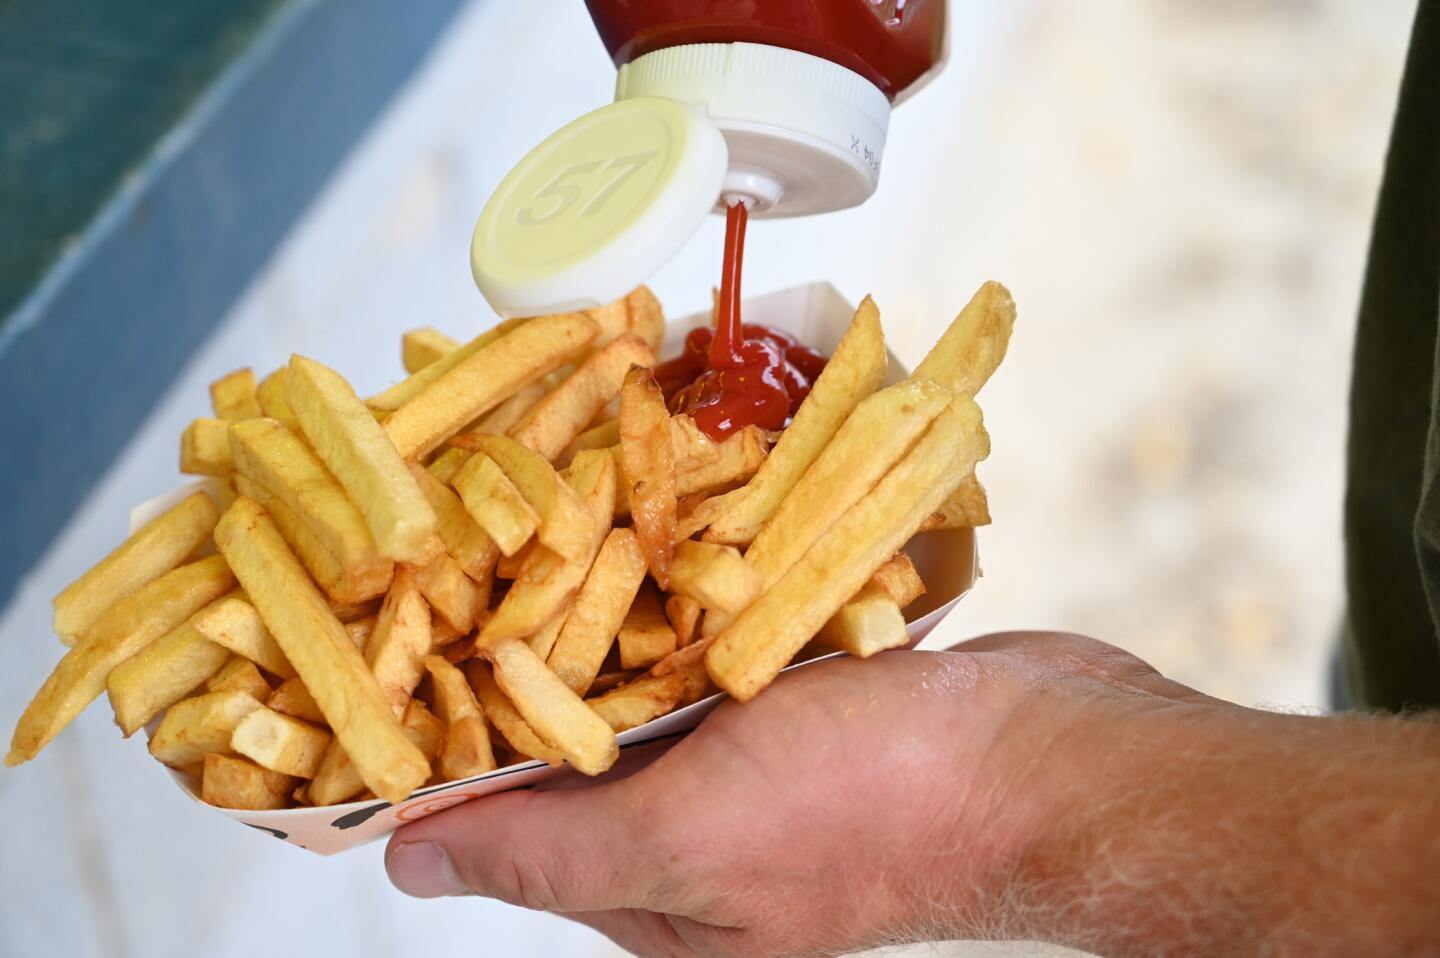 A customer adds ketchup to an order of fries during the carnival at Reese & Community Volunteer Fire Company on Tuesday, July 16.